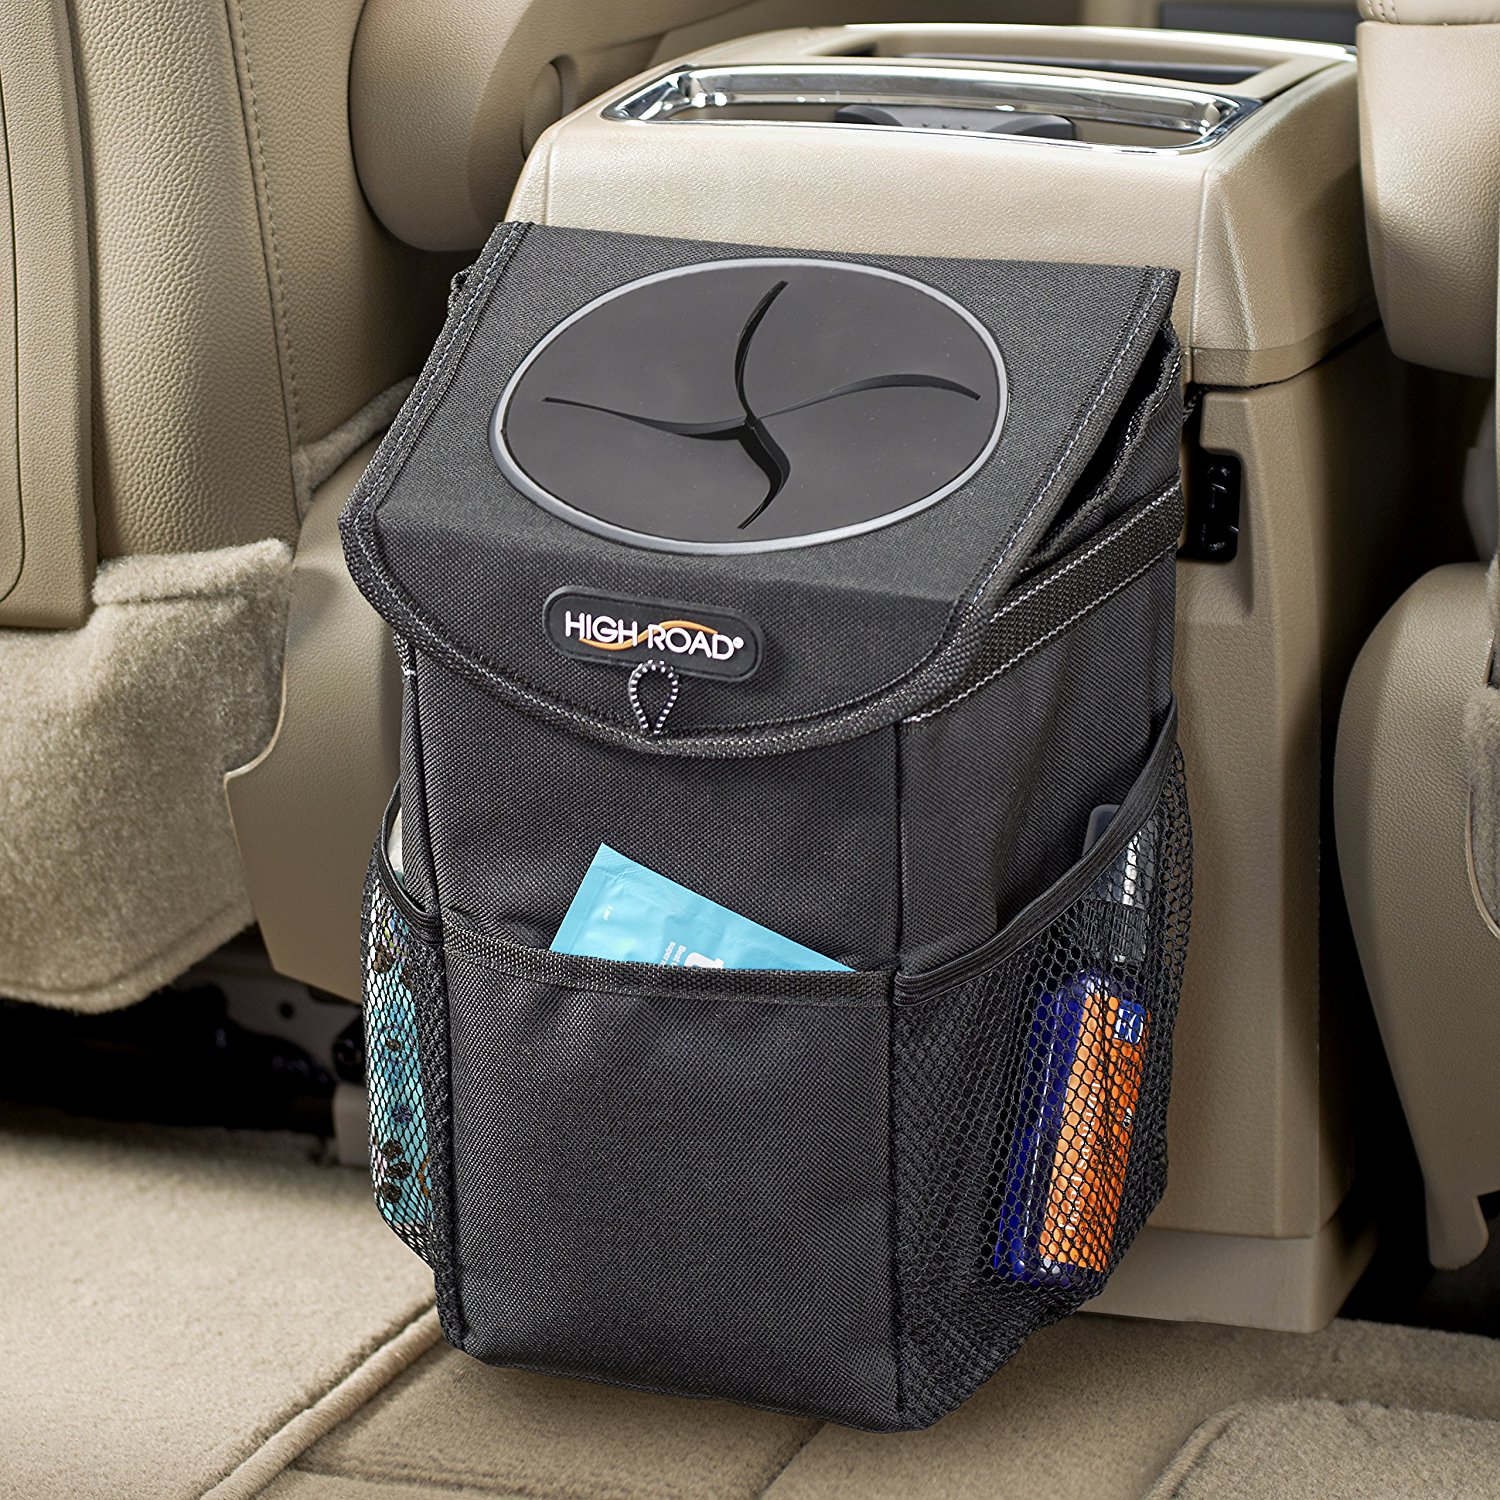 High Road StashAway Car Trash Can with Lid and Storage Pockets